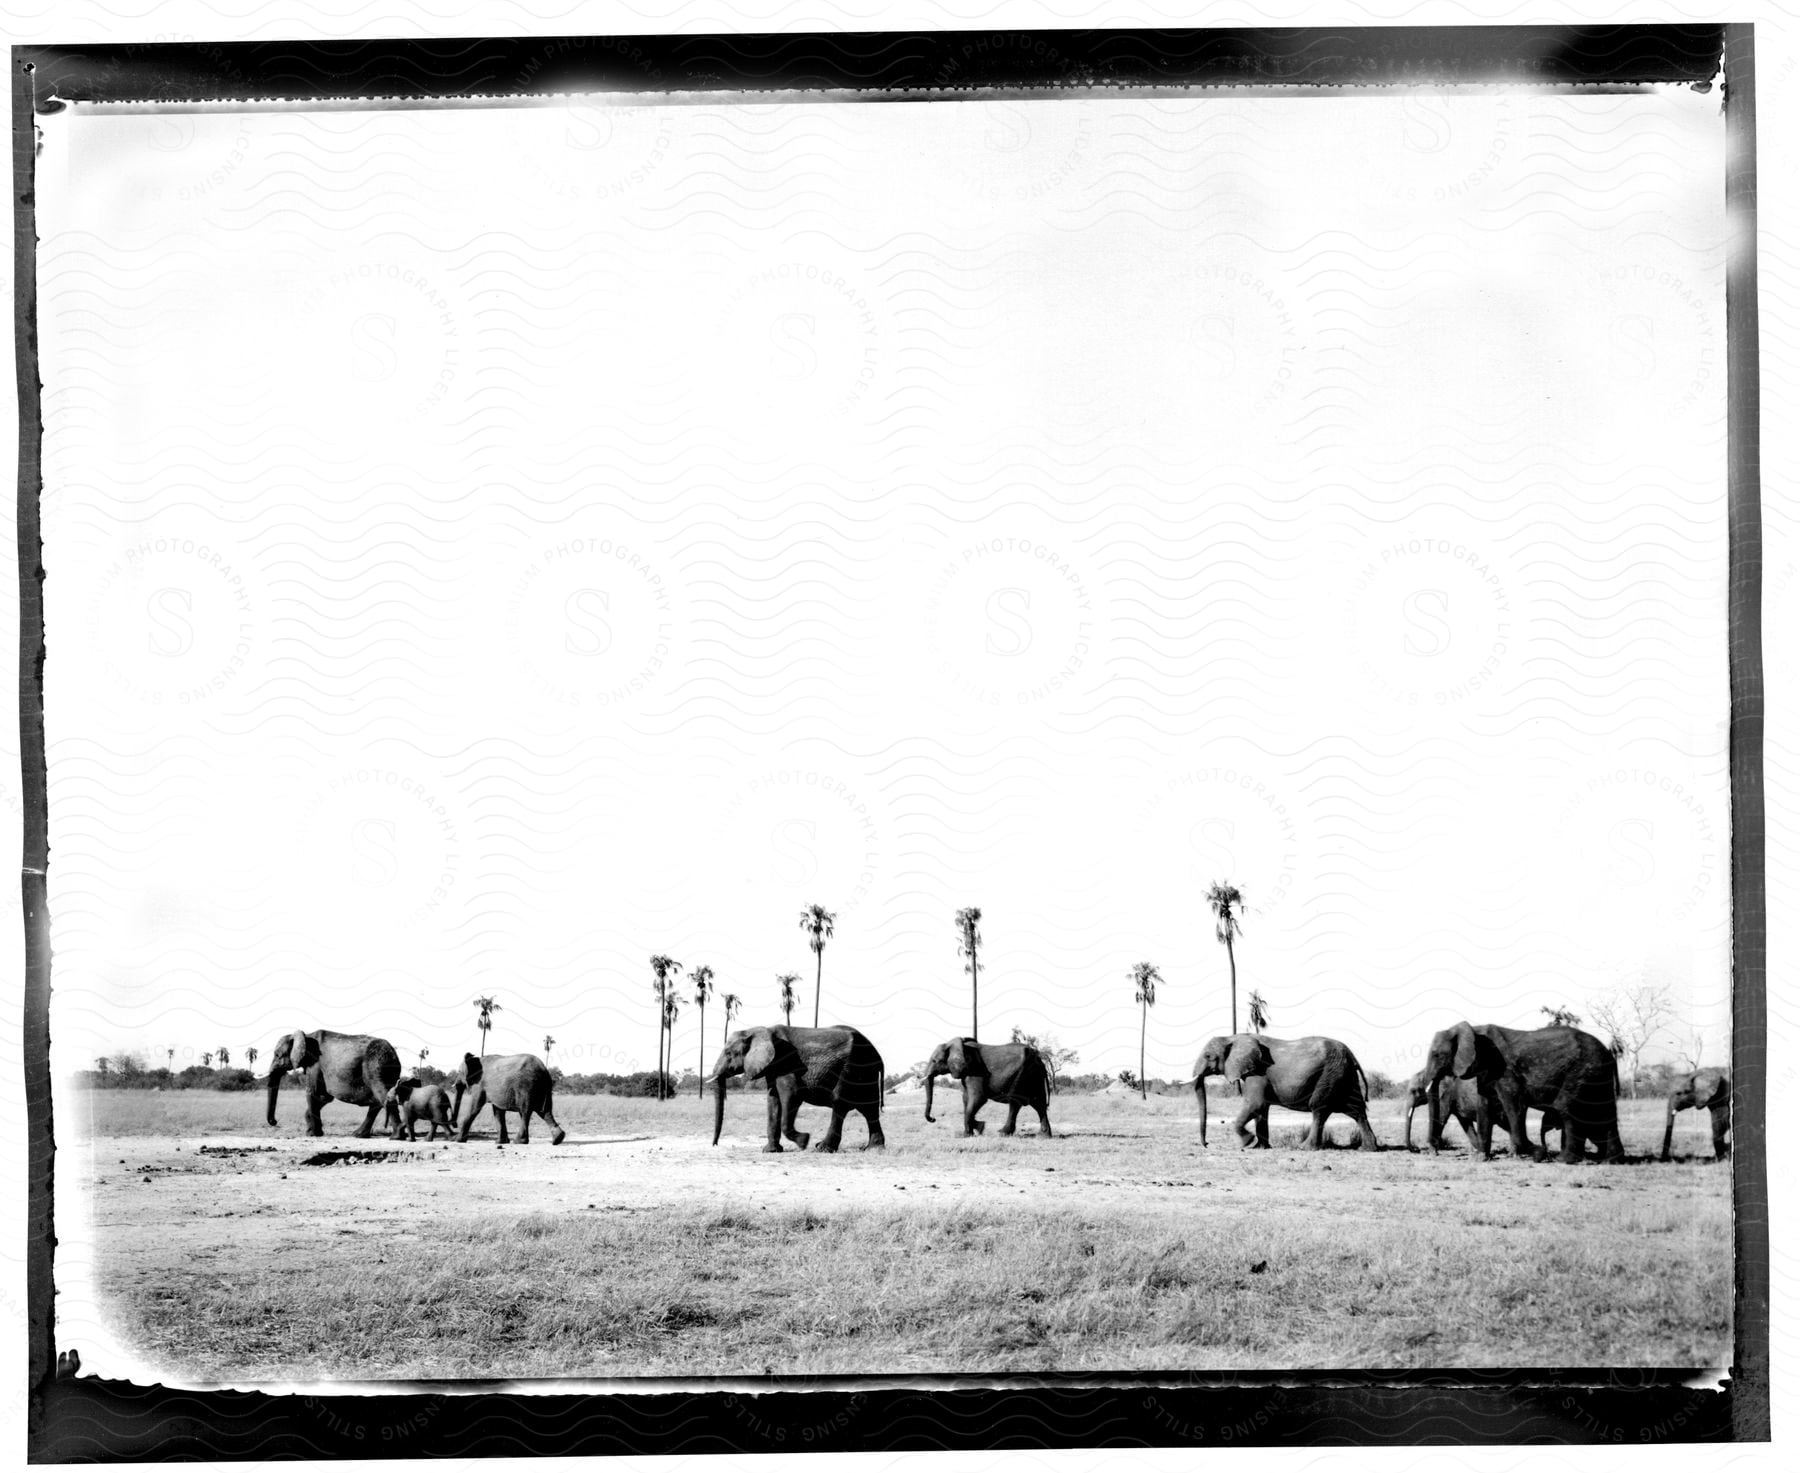 Stock photo of an old black and white photo of elephants in a desert